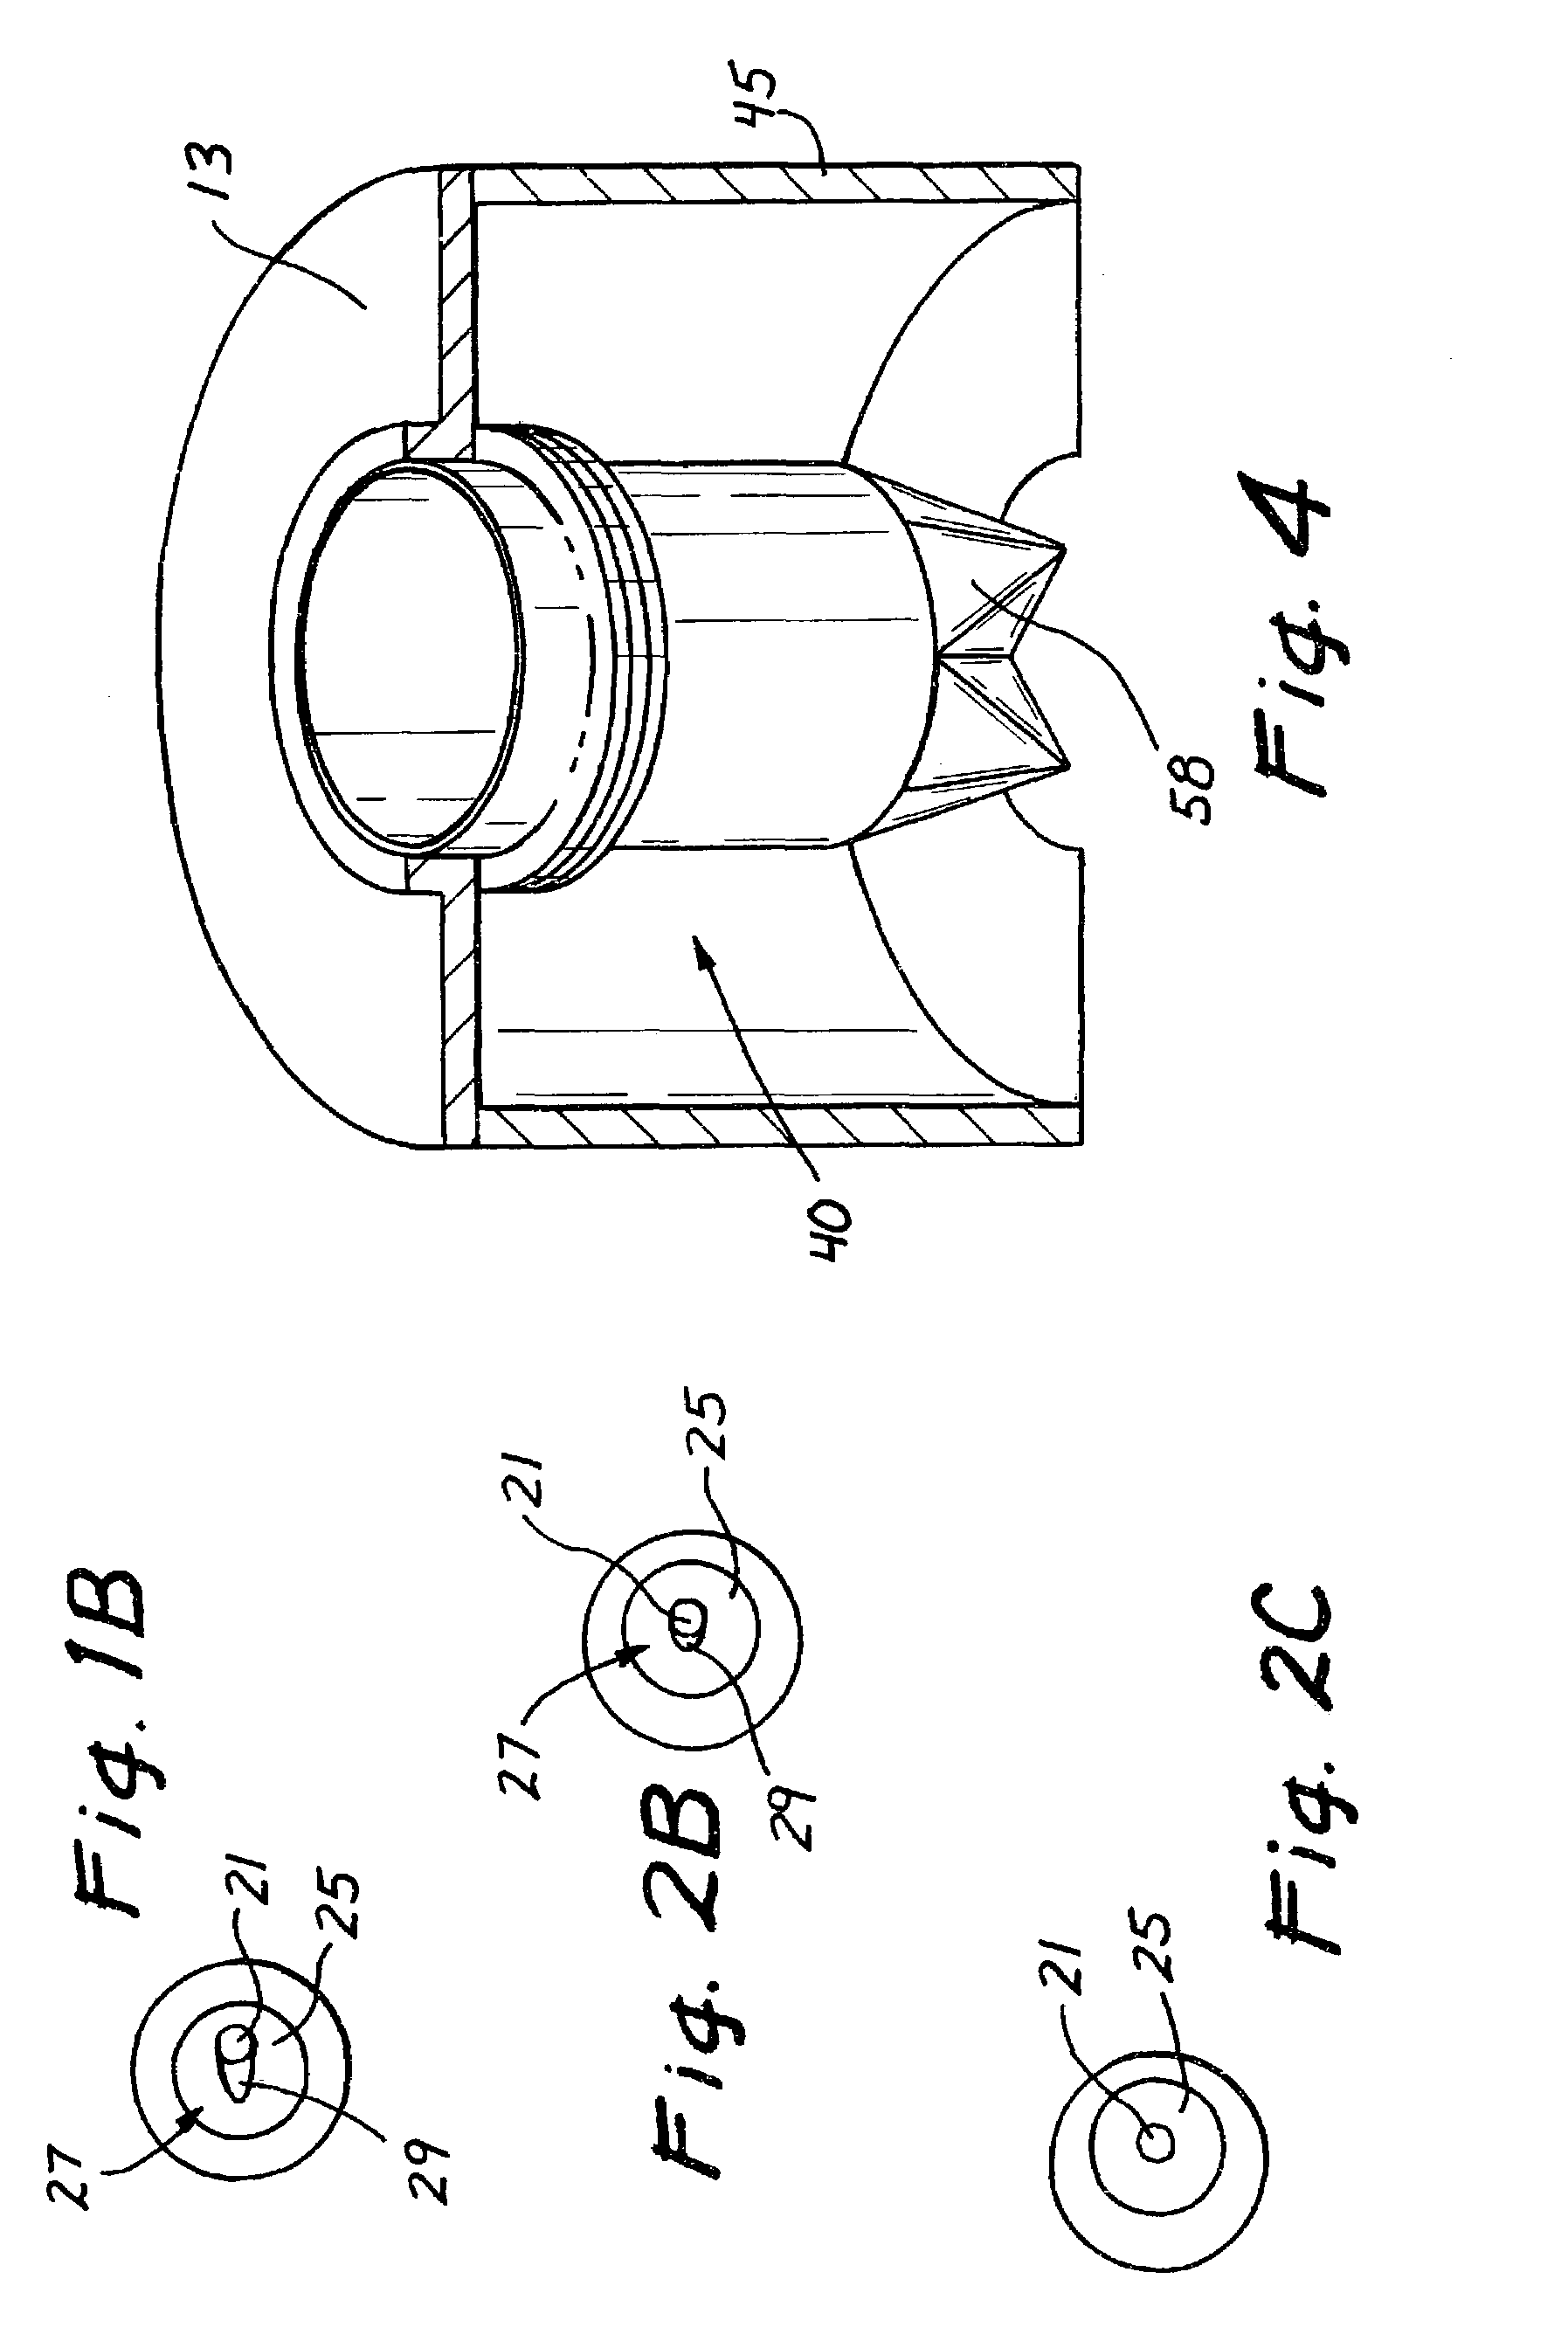 Surgical access device with pendent valve